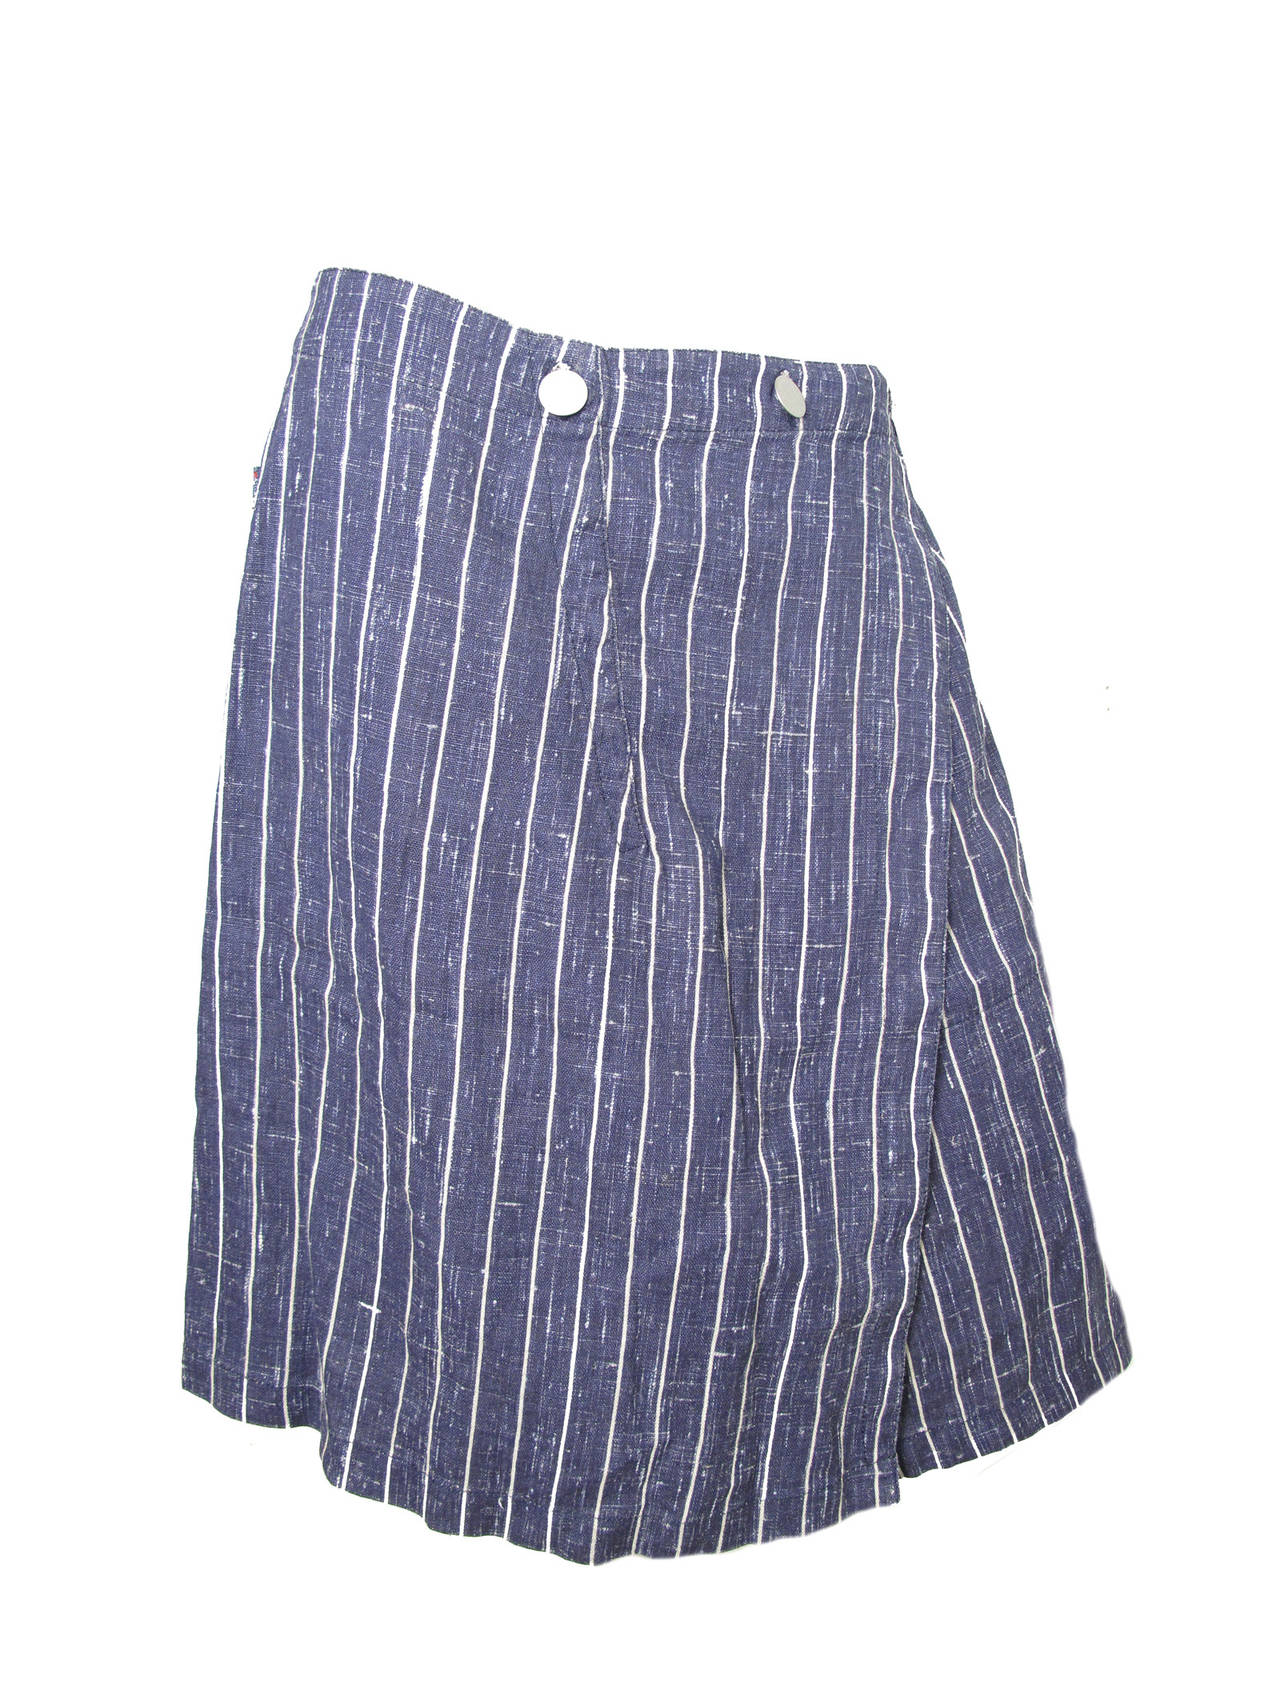 Jean paul gaultier linen navy and off white striped wrap skirt.  One back pocket, and one side zipper pocket.  Condition: Excellent, never worn, tags still attached. 32